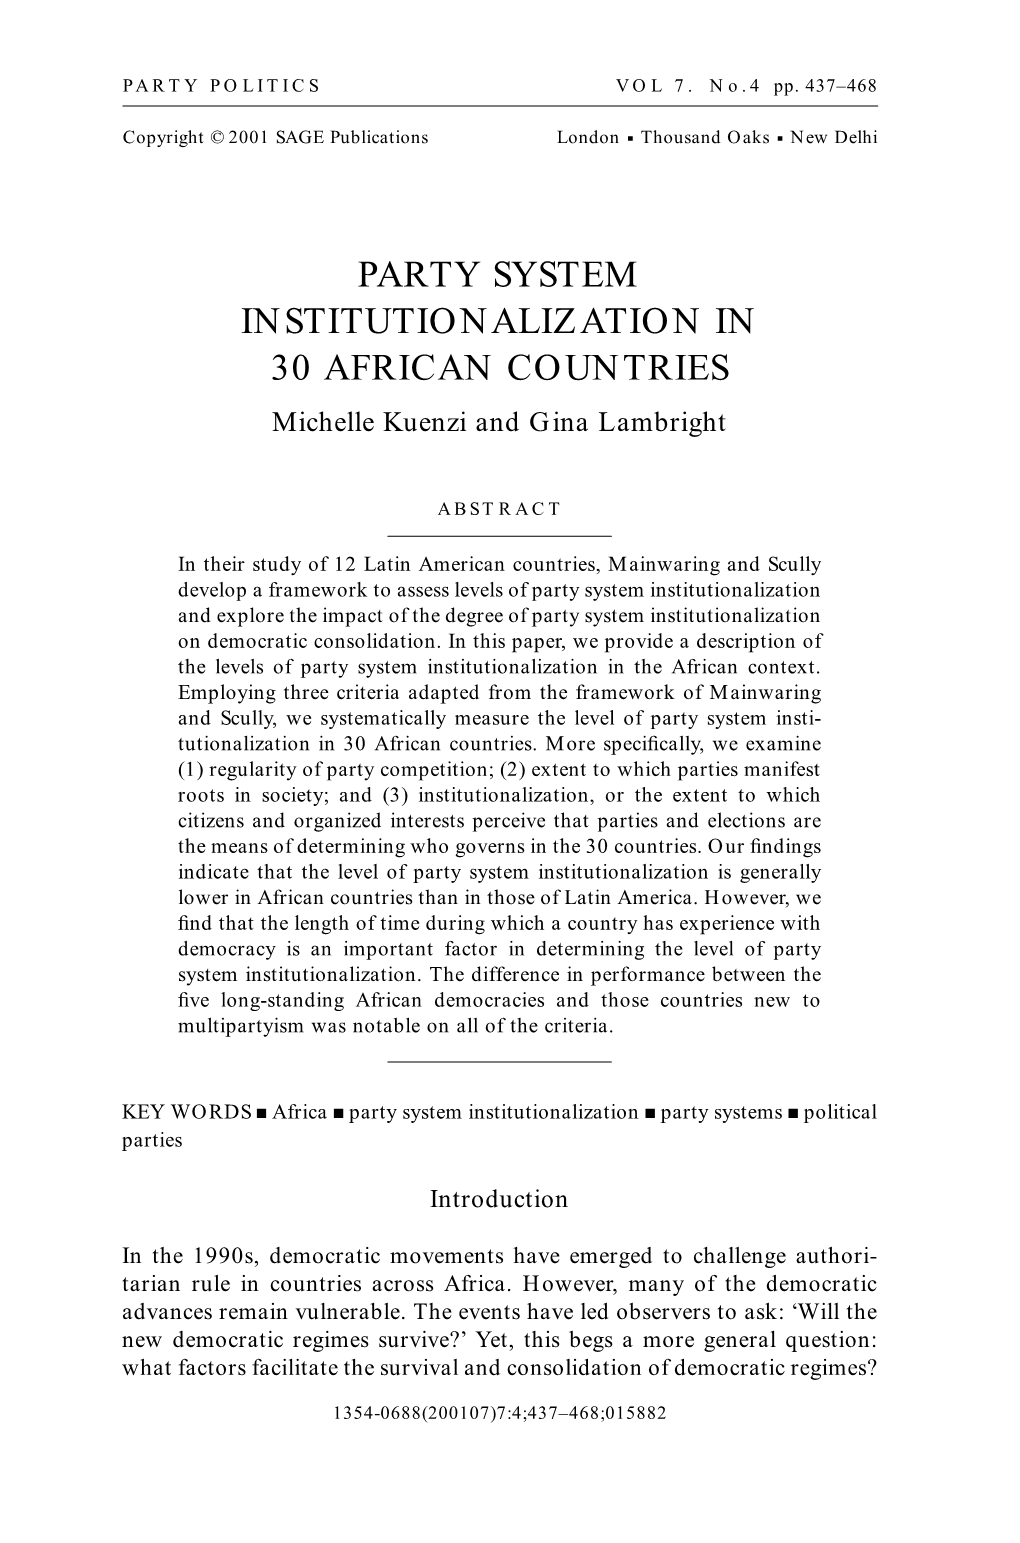 PARTY SYSTEM INSTITUTIONALIZATION in 30 AFRICAN COUNTRIES Michelle Kuenzi and Gina Lambright